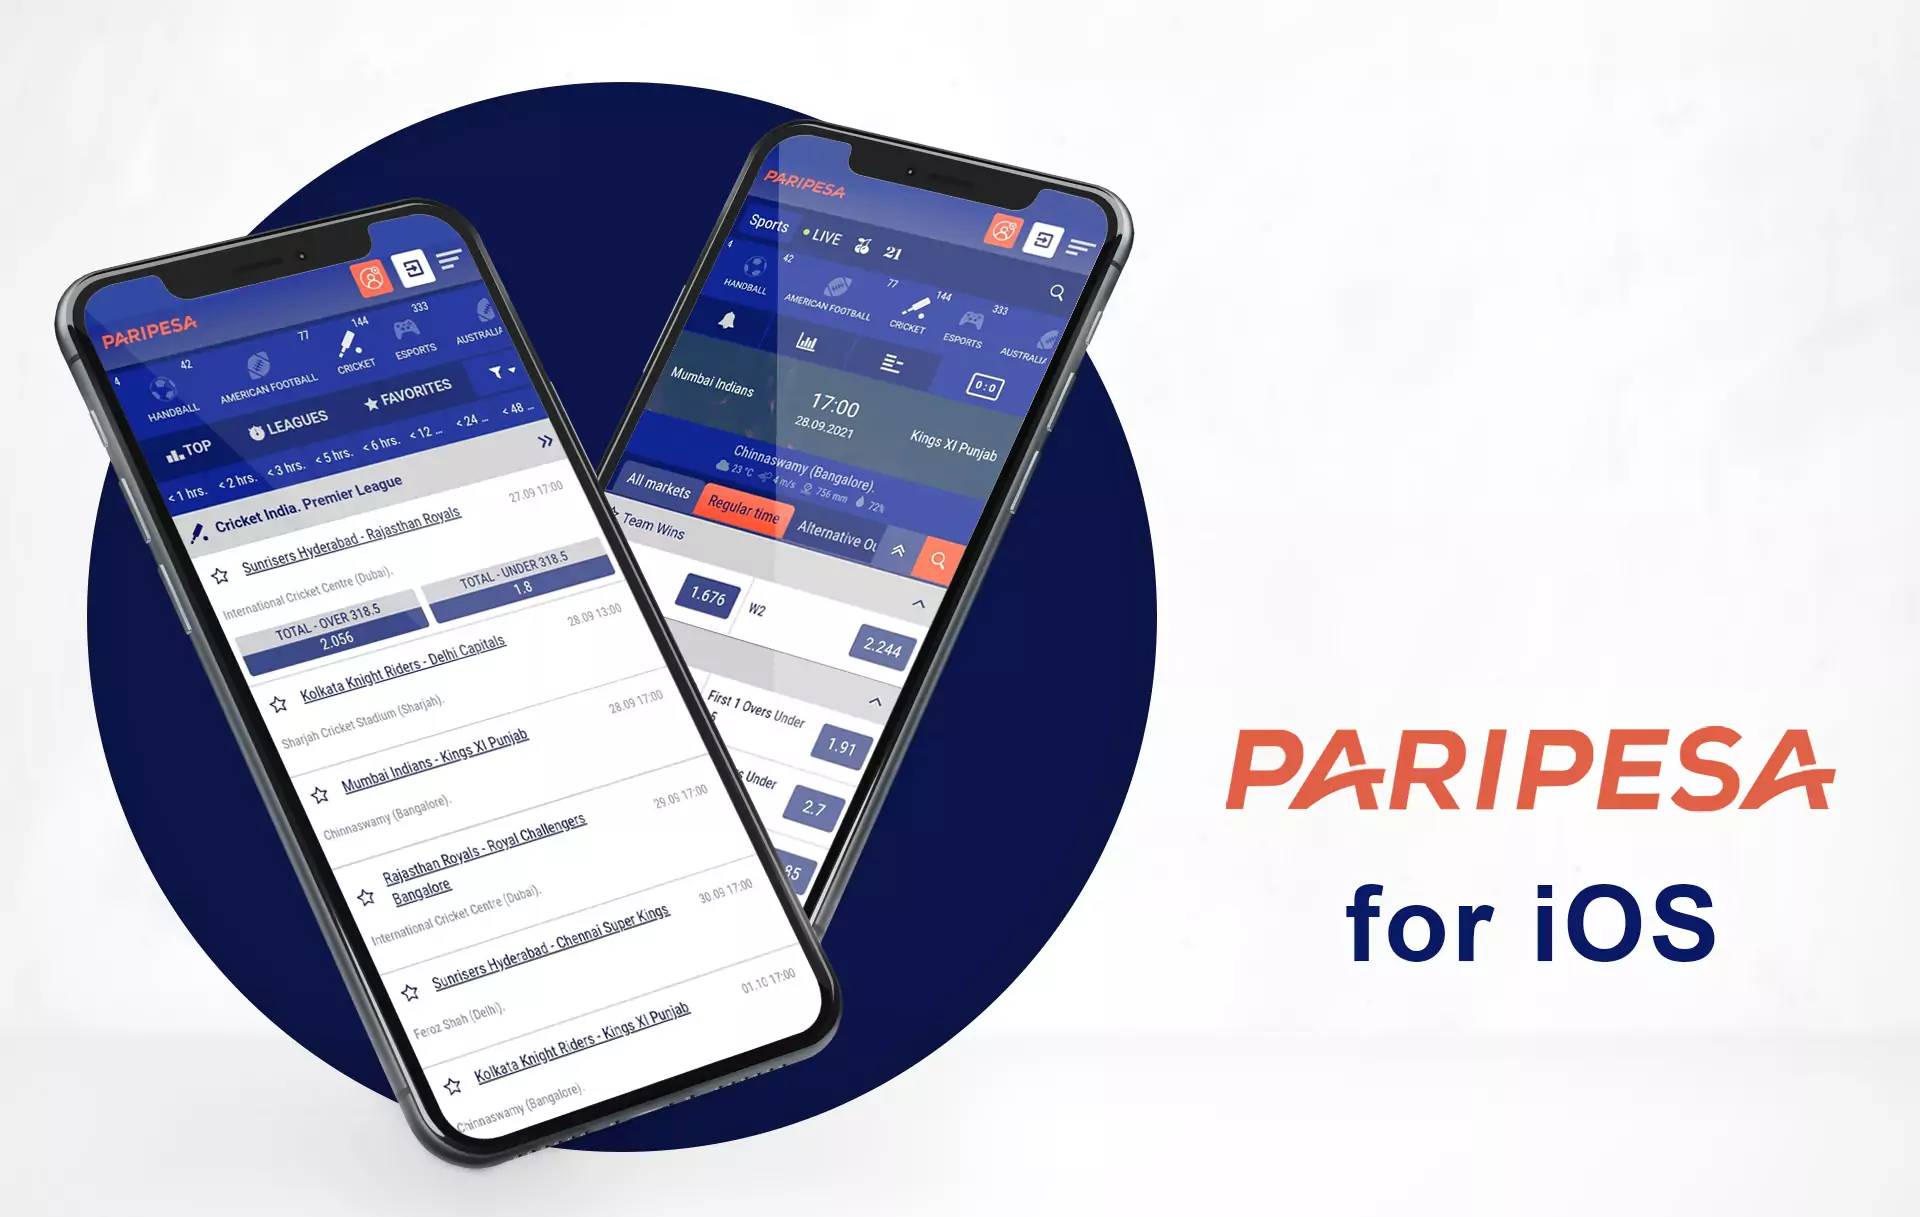 For iPhones, there is no application of PariPesa yet.